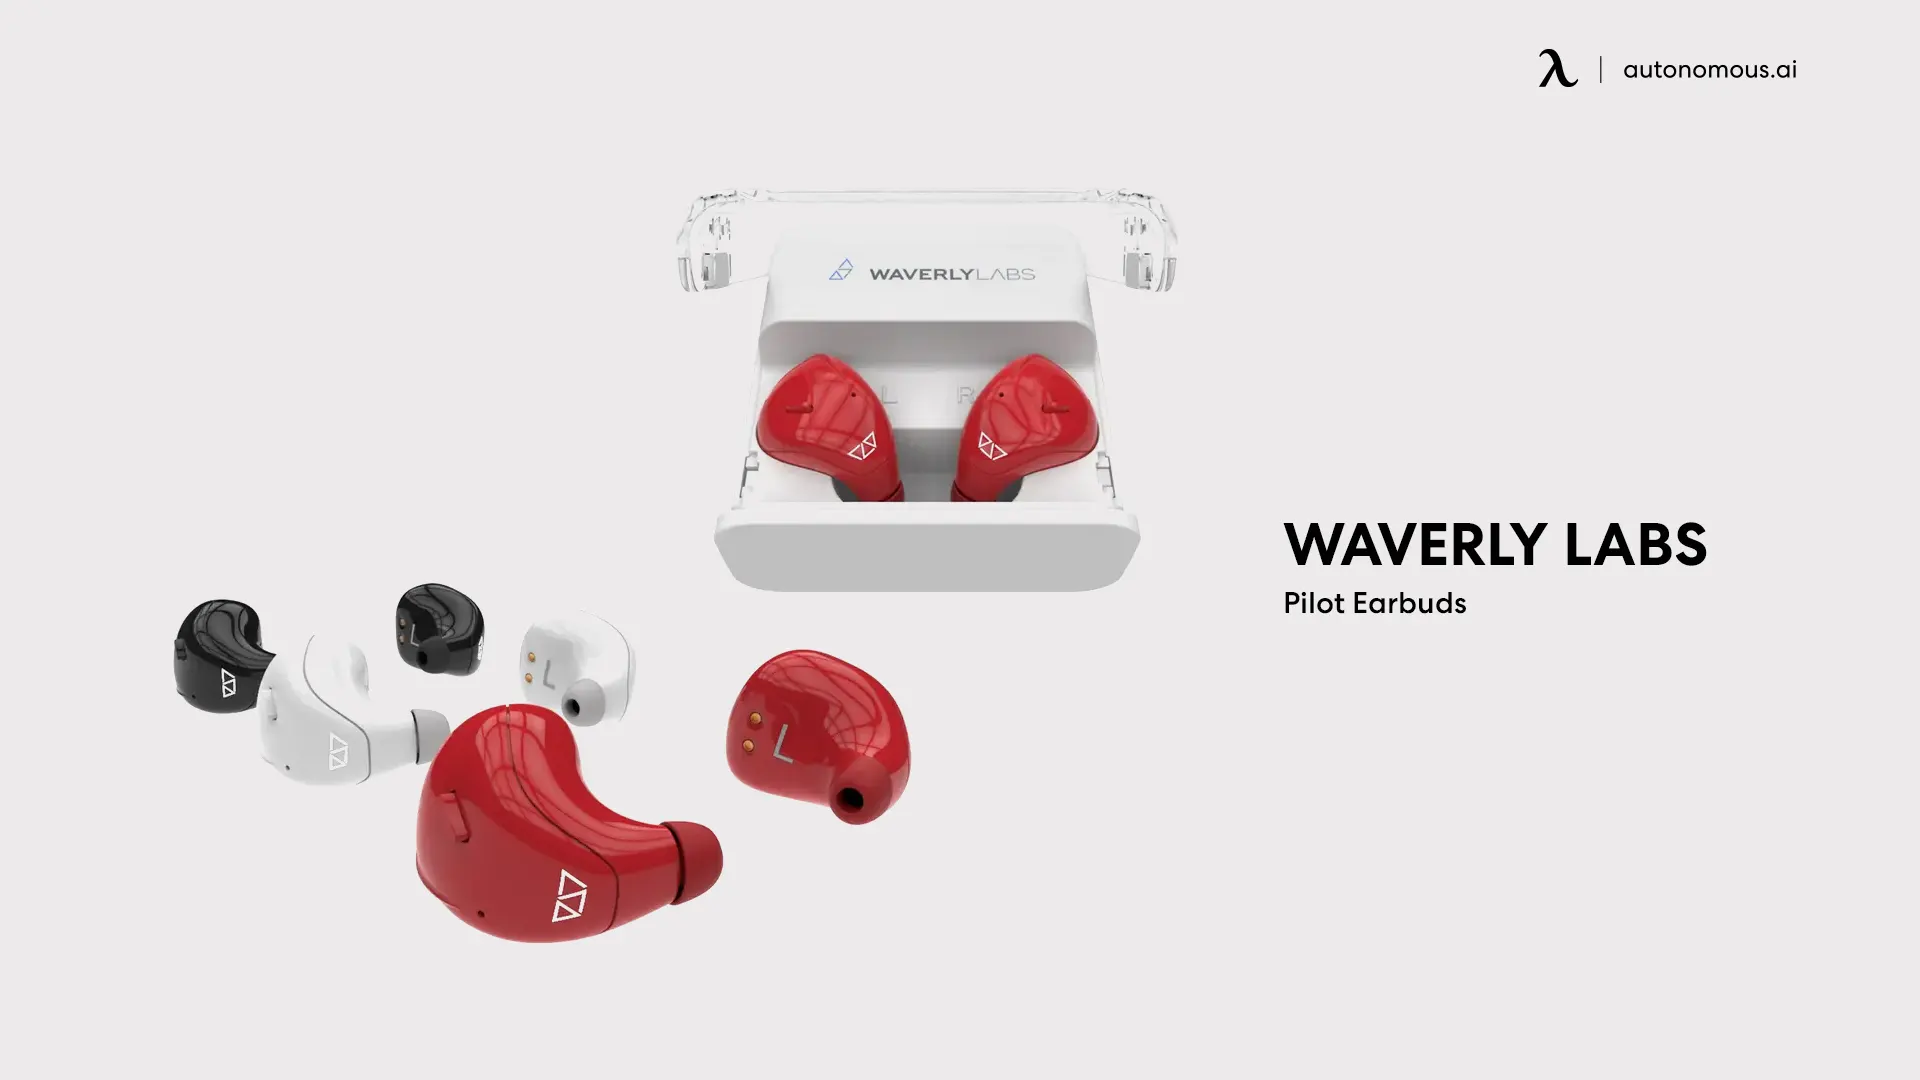 Waverly Labs Pilot Earbuds